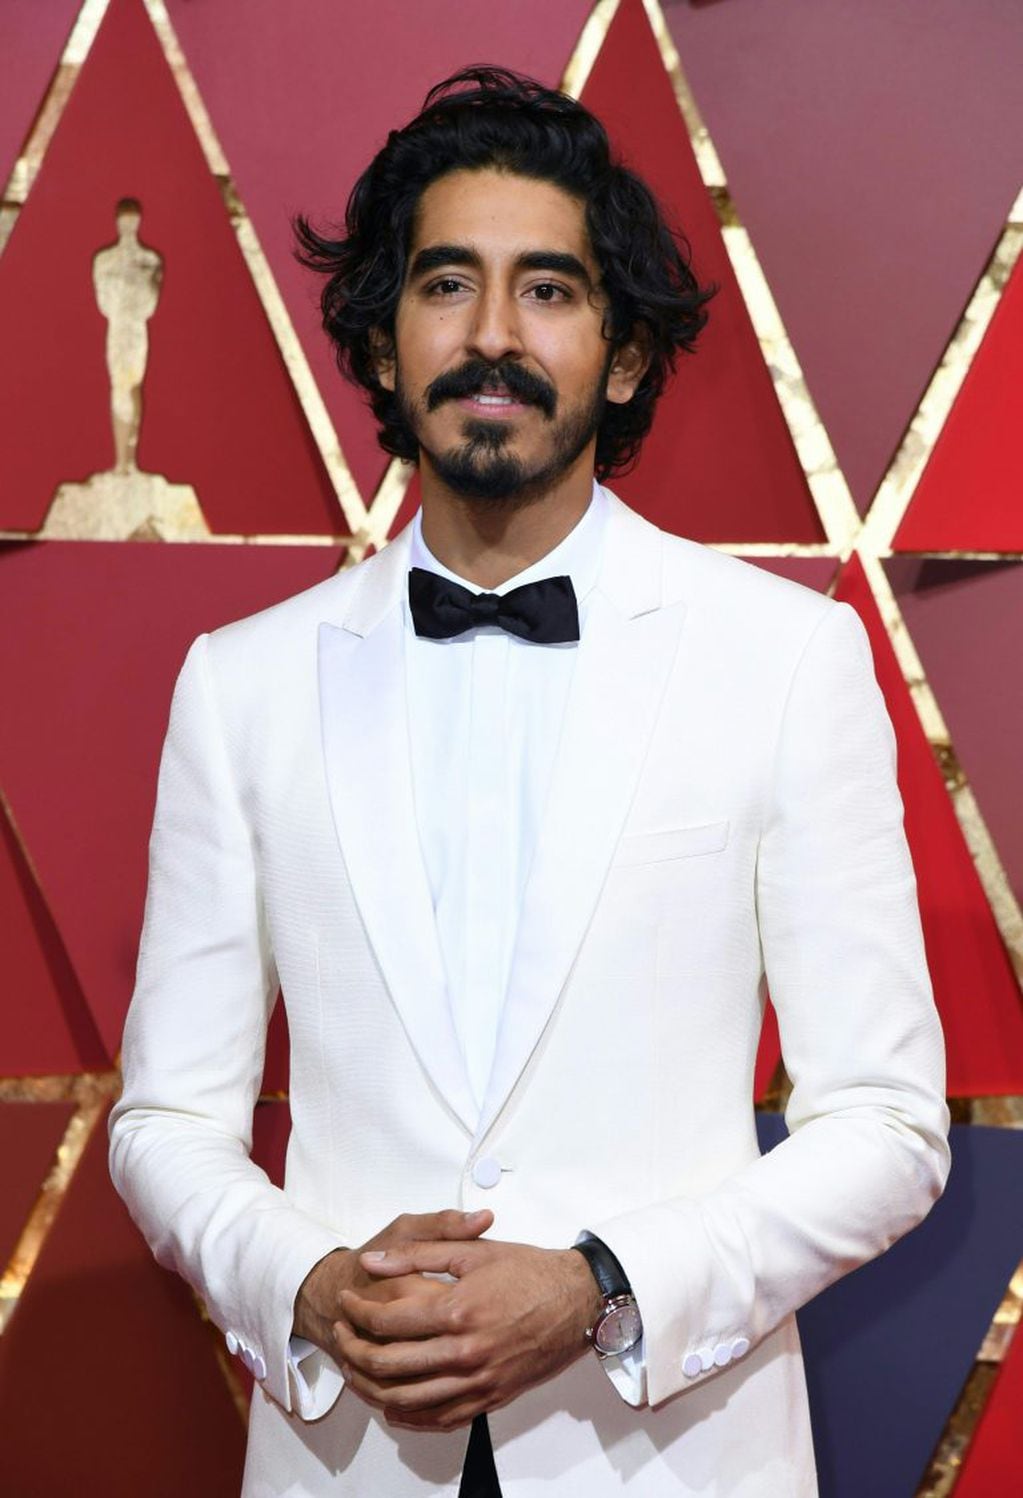 Nominee for Best Supporting Actor "Lion" Dev Patel arrives on the red carpet for the 89th Oscars on February 26, 2017 in Hollywood, California.  / AFP PHOTO / ANGELA WEISS